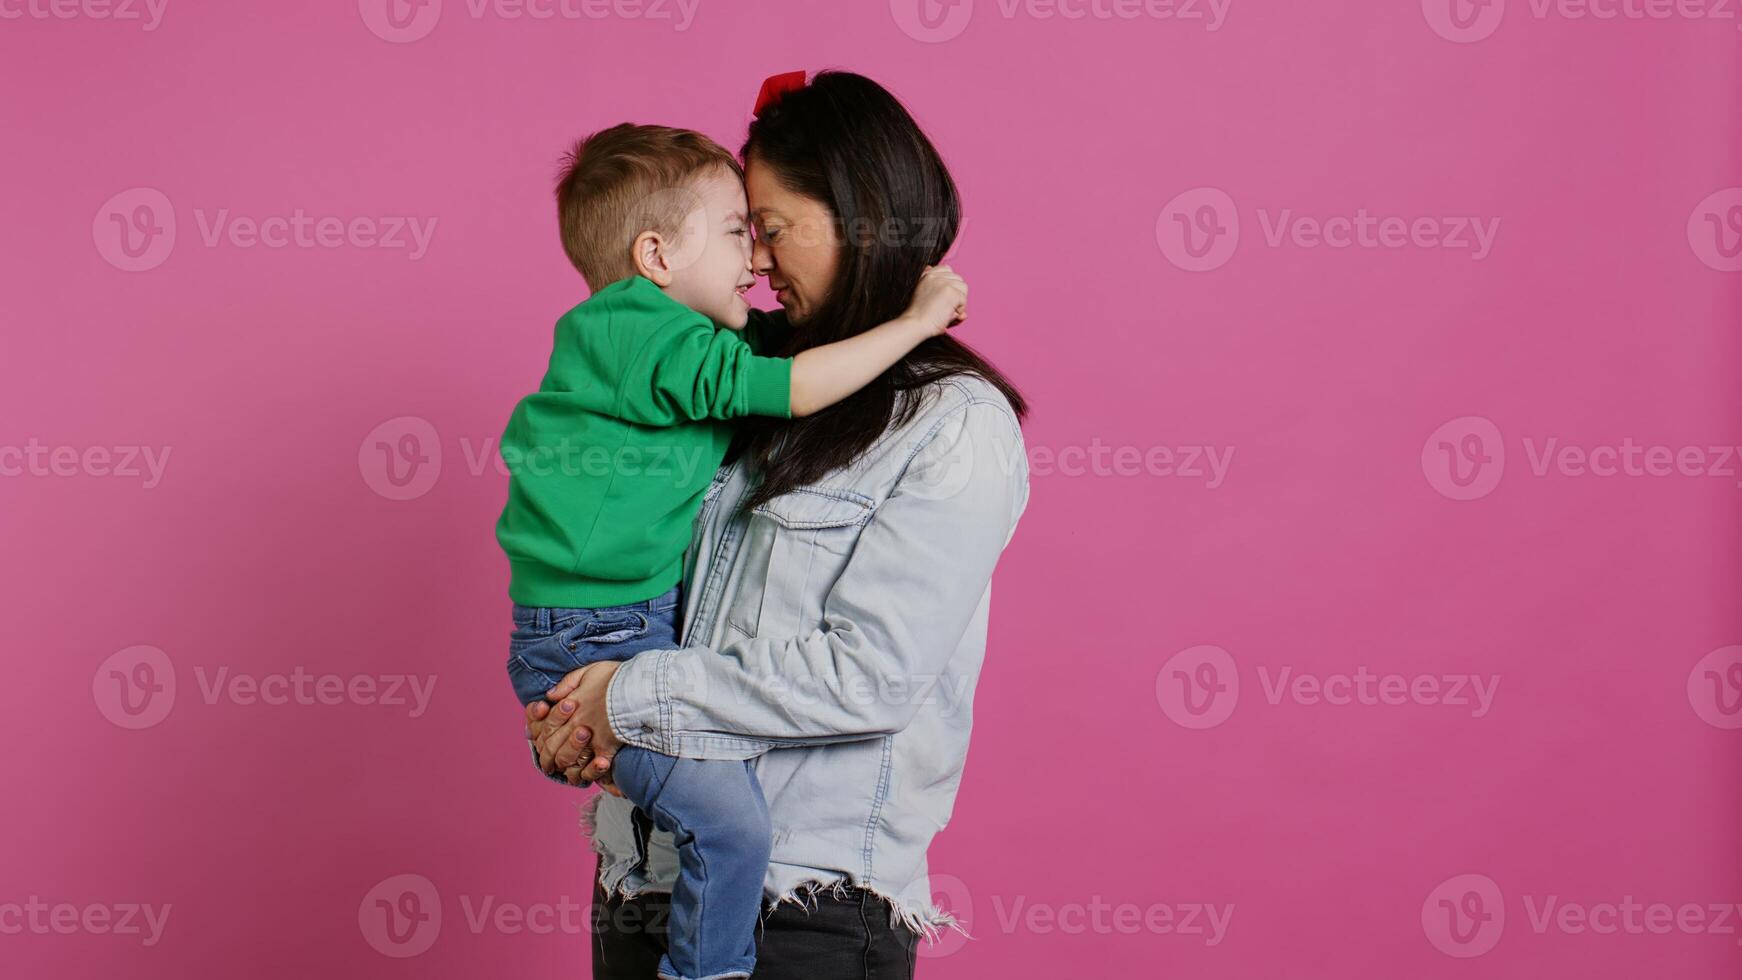 Adorable small boy hugging his mother and playing around, having fun against pink background. Young toddler posing with his mom holding him, laughing and being cheery. Camera B. photo